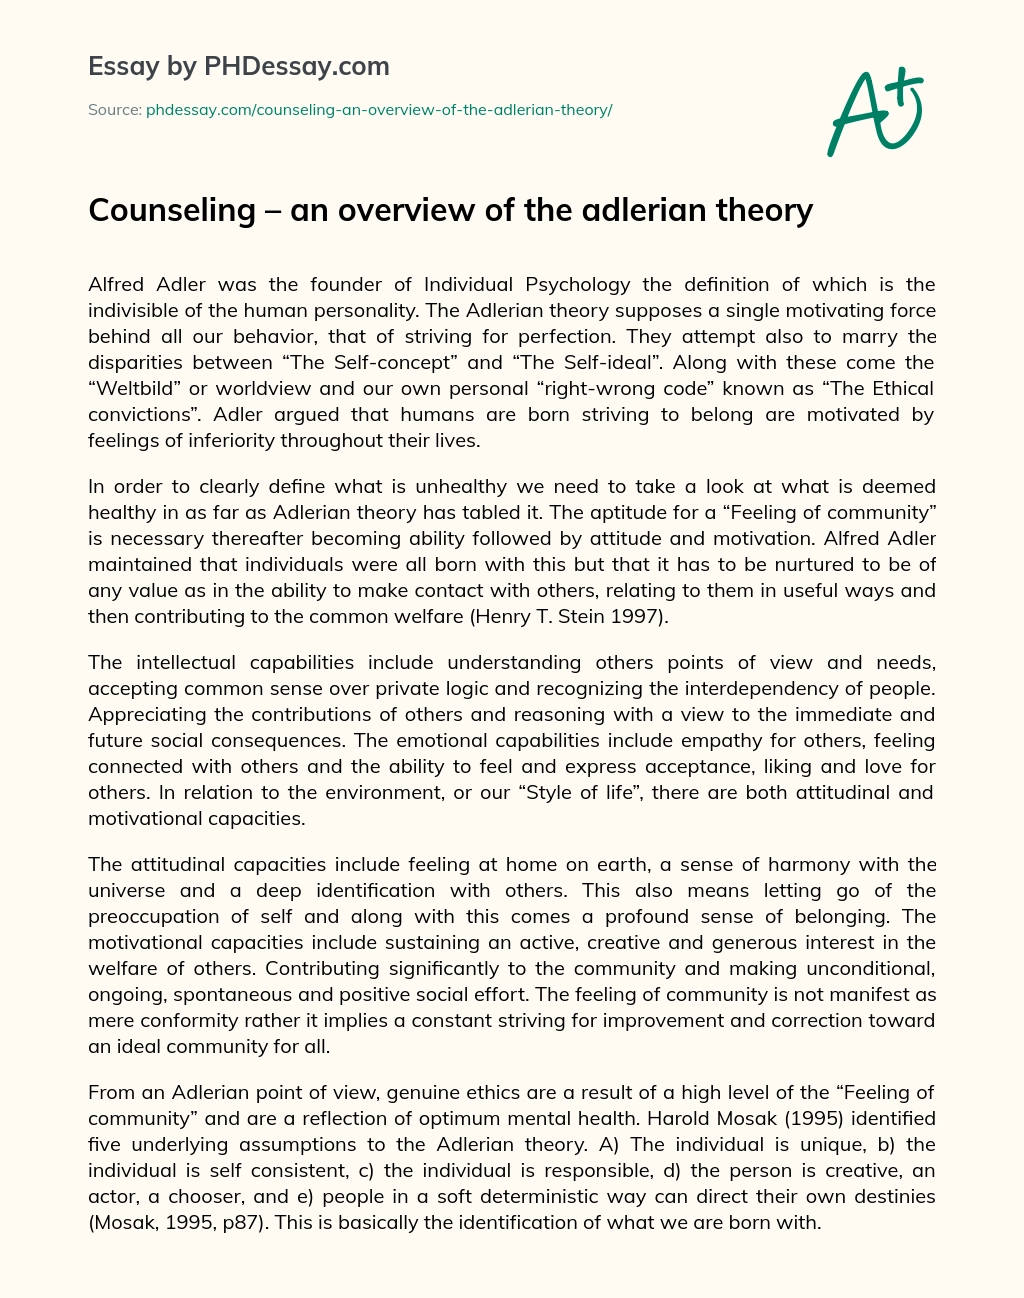 Counseling – an overview of the adlerian theory essay